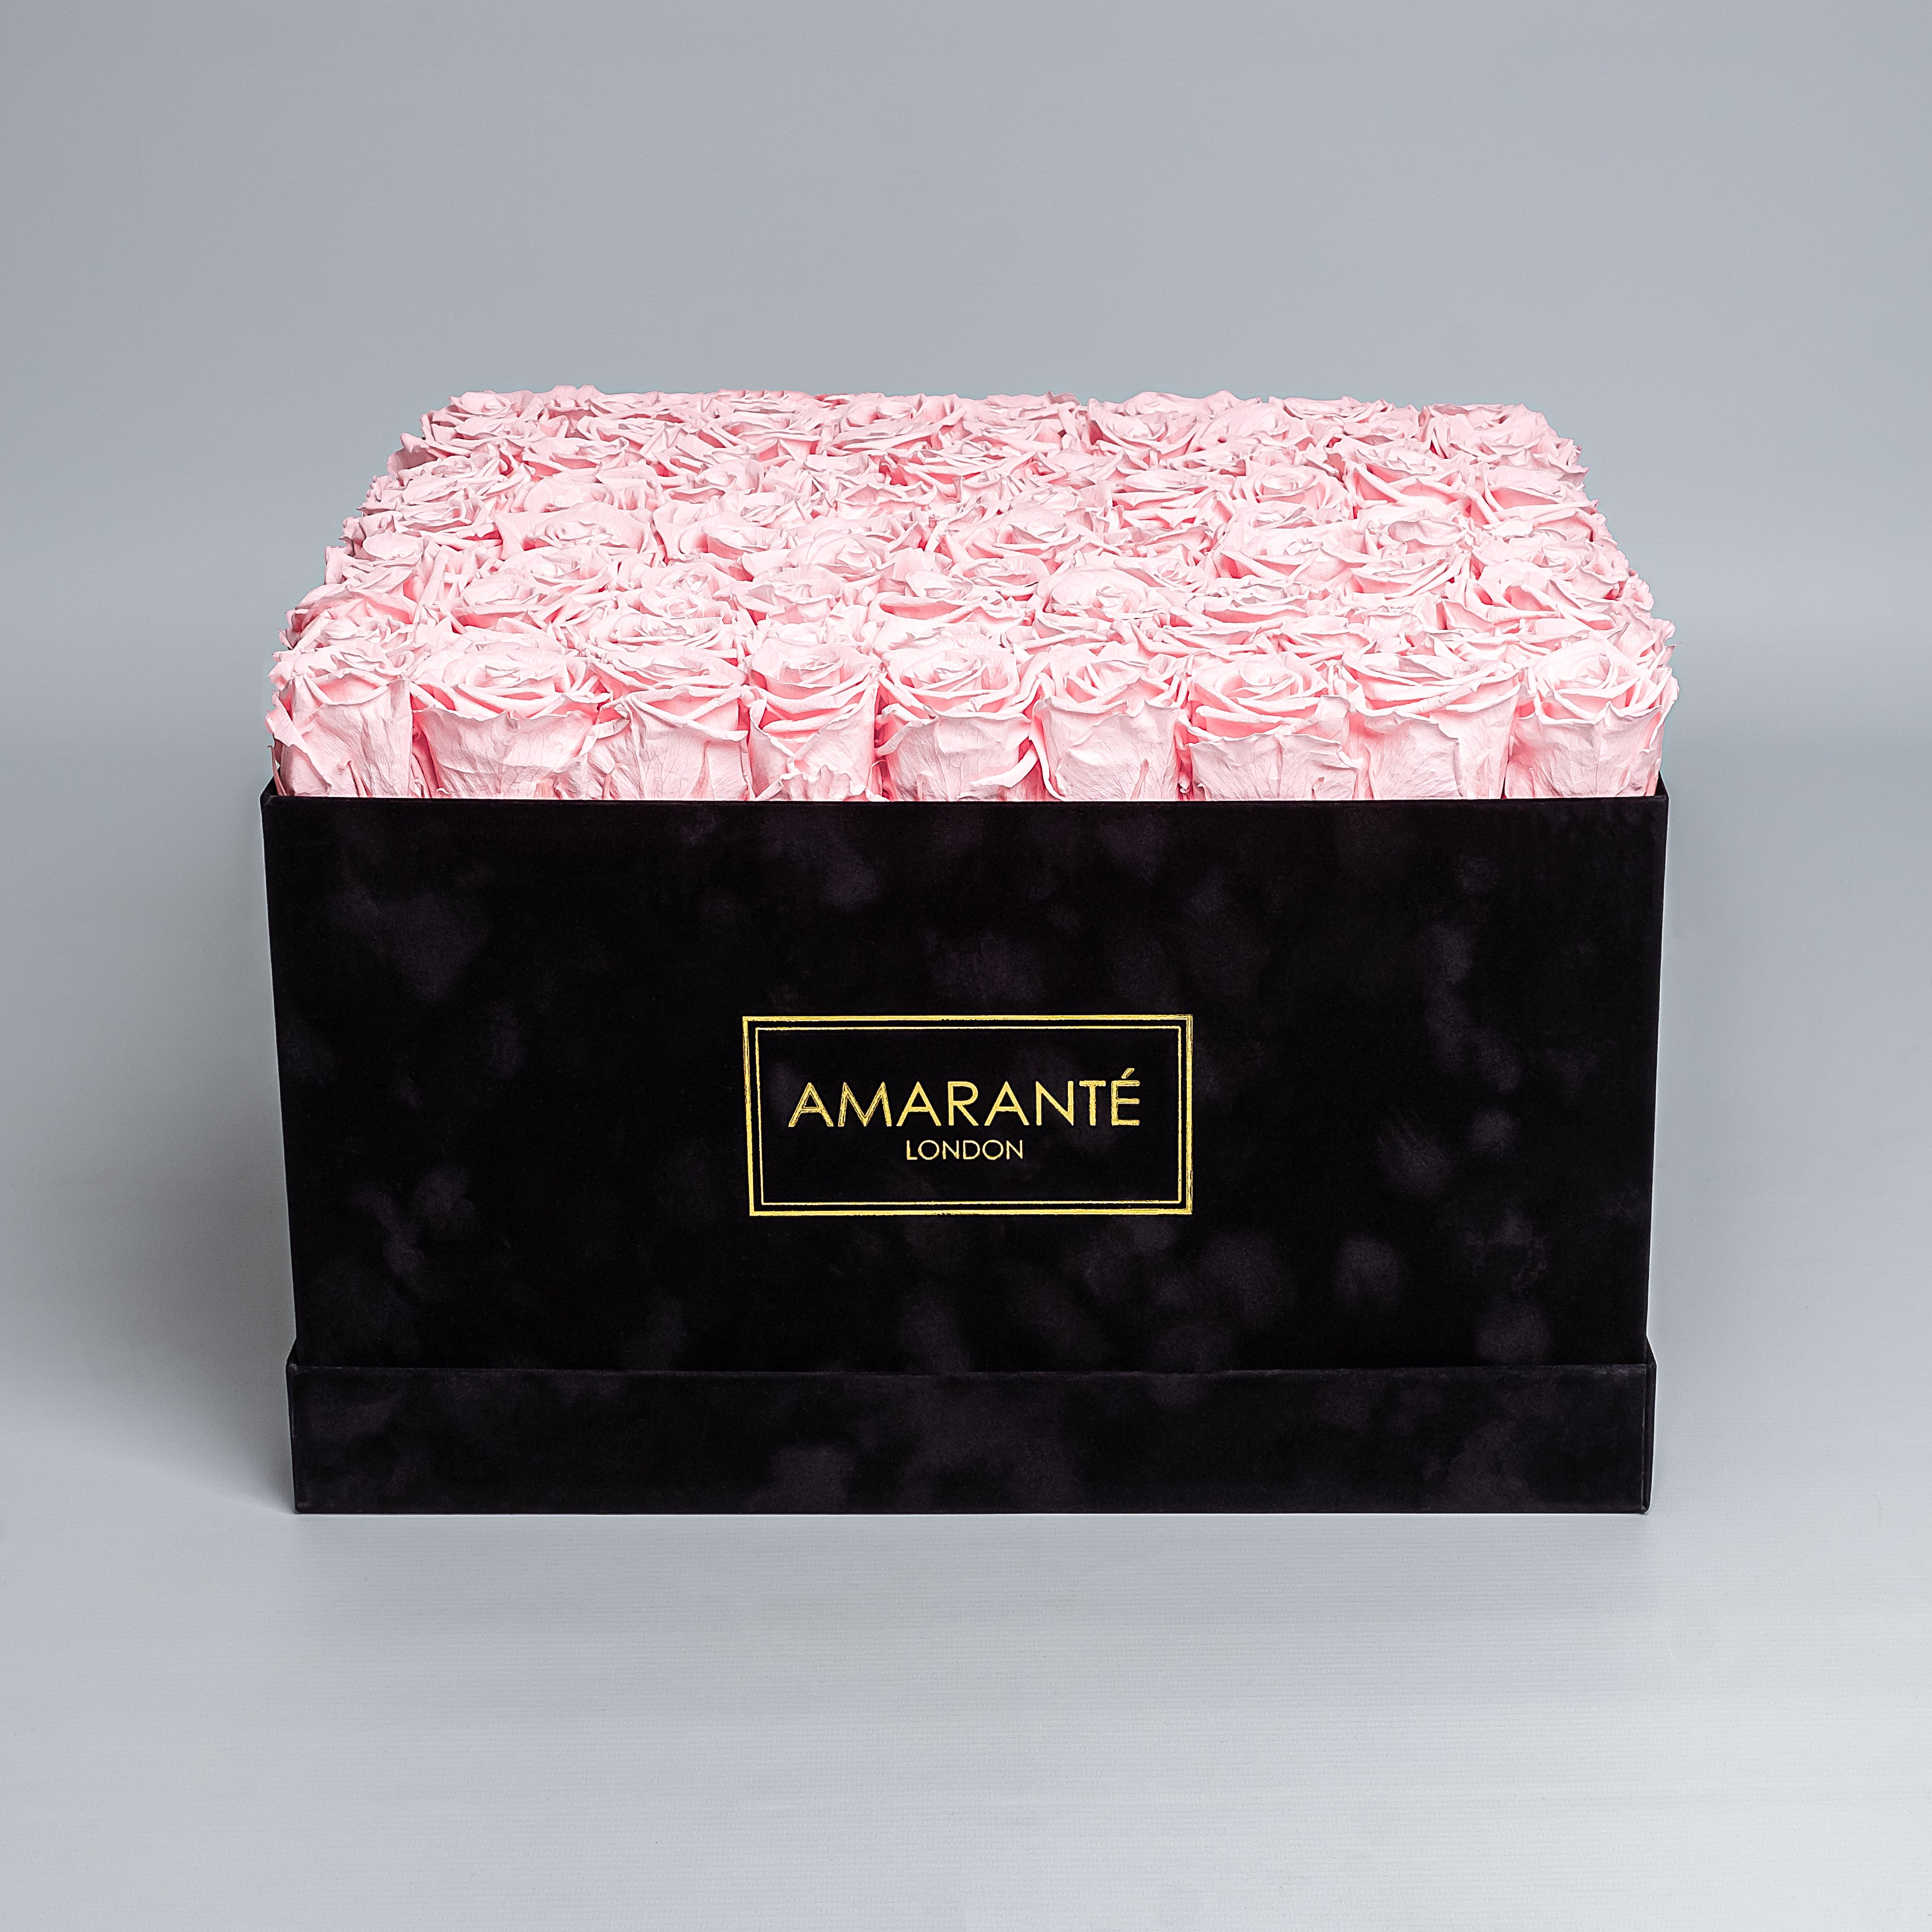 Luxurious 16"x16" black square rose box of pink everlasting roses with an elegant suede finish, offering free UK delivery. Choose from a palette of 14 delicate pastel colours.